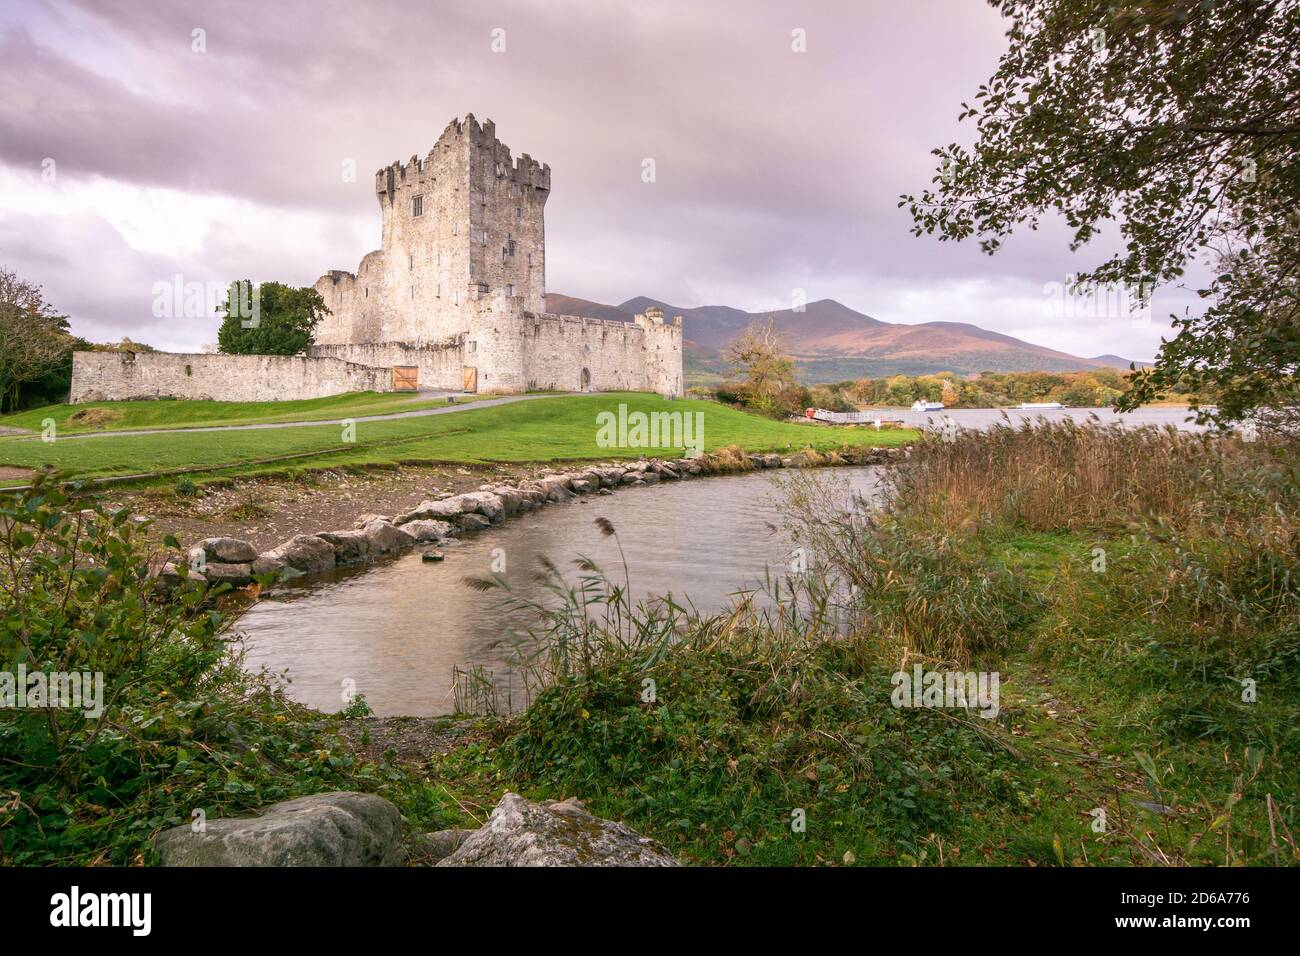 View of Ross Castle on shore of Lough Leane in Killarney National Park in Ireland Stock Photo